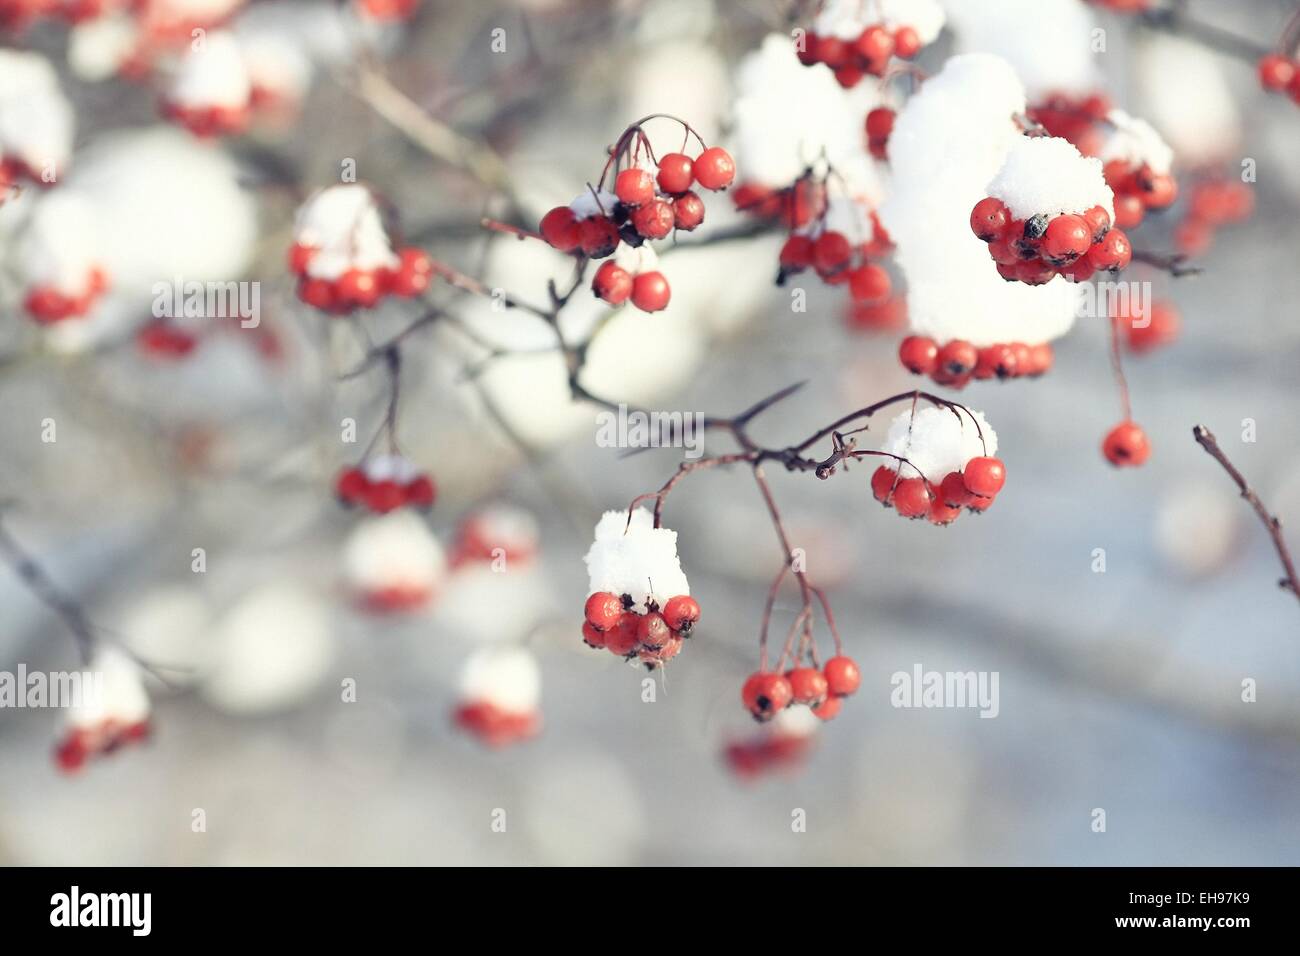 red berries under snow, snow, background, mountain ash, hawthorn Stock Photo